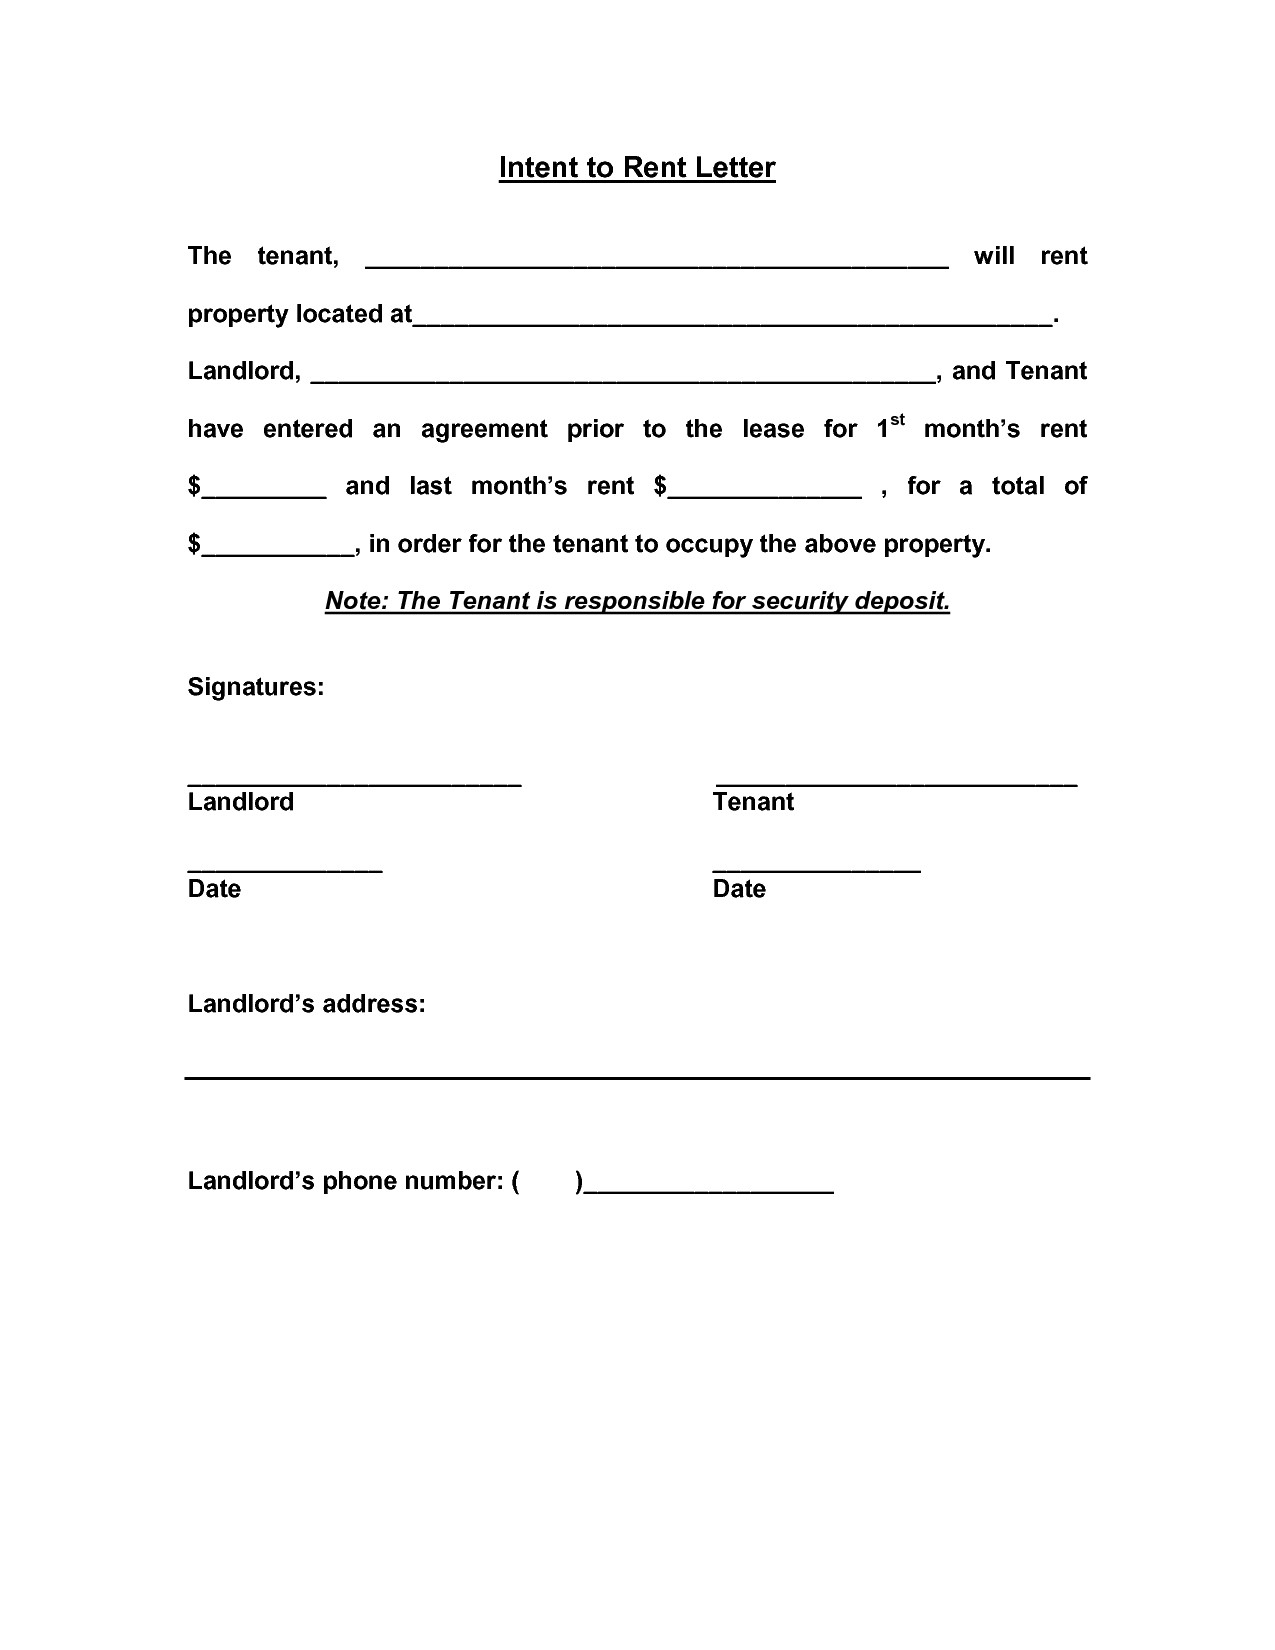 Tenancy Agreement Extension Letter Letter Request Transfer Tenancy Agreement New Lease Extension With